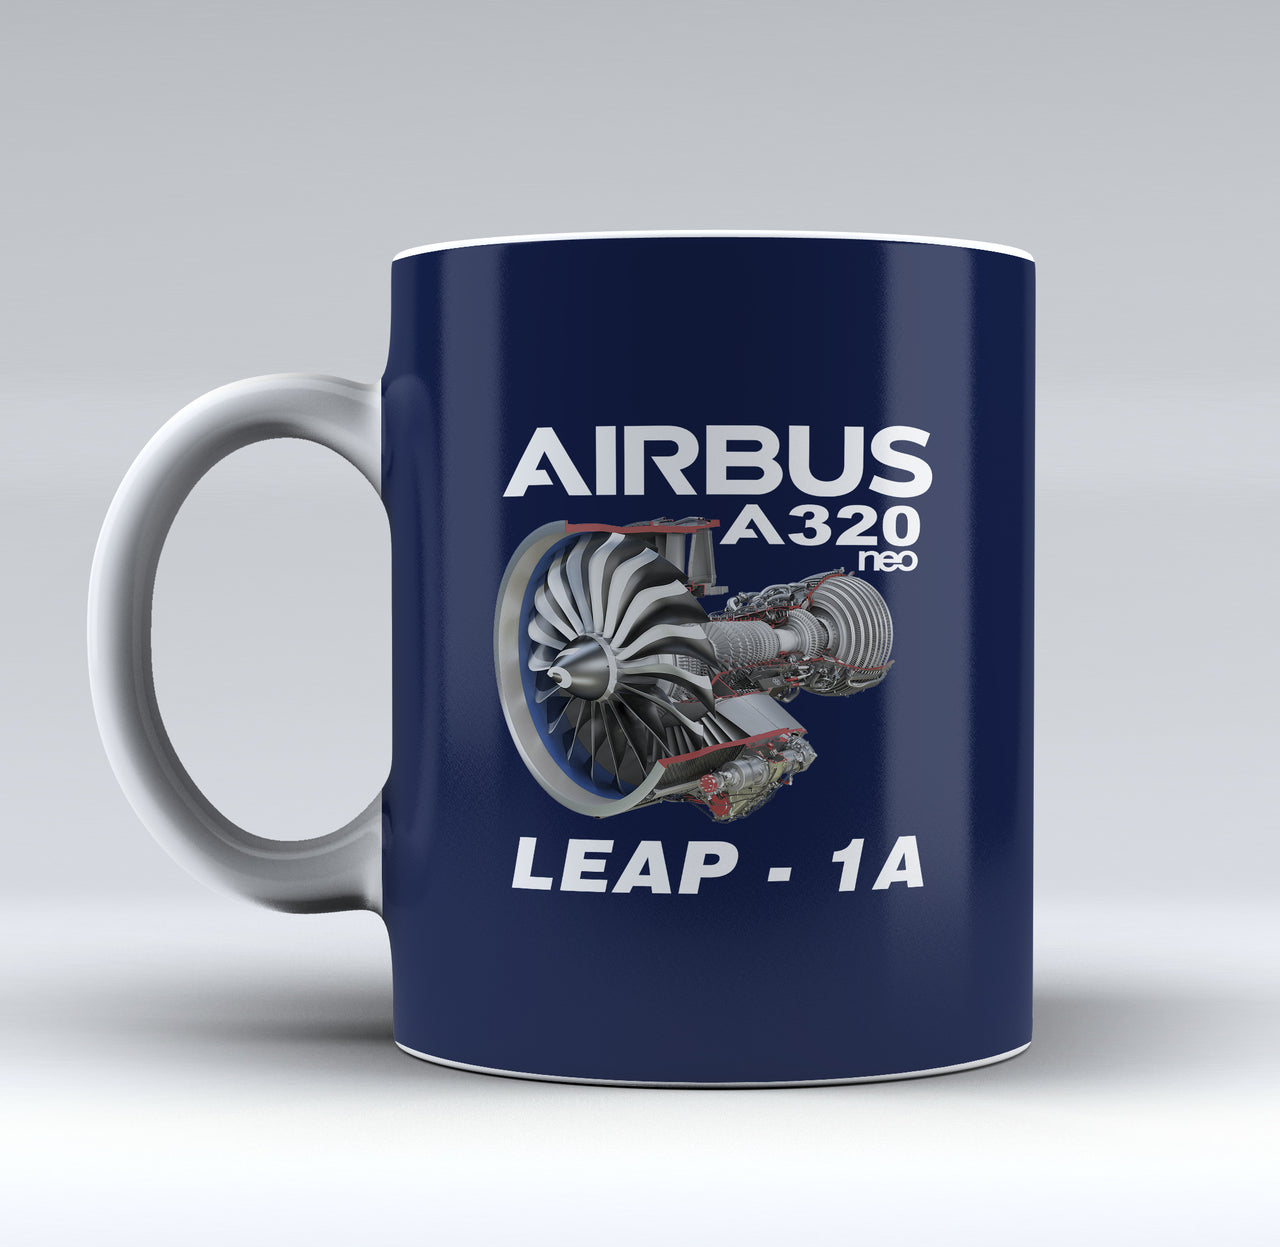 Airbus A320neo & Leap 1A Engine Designed Mugs